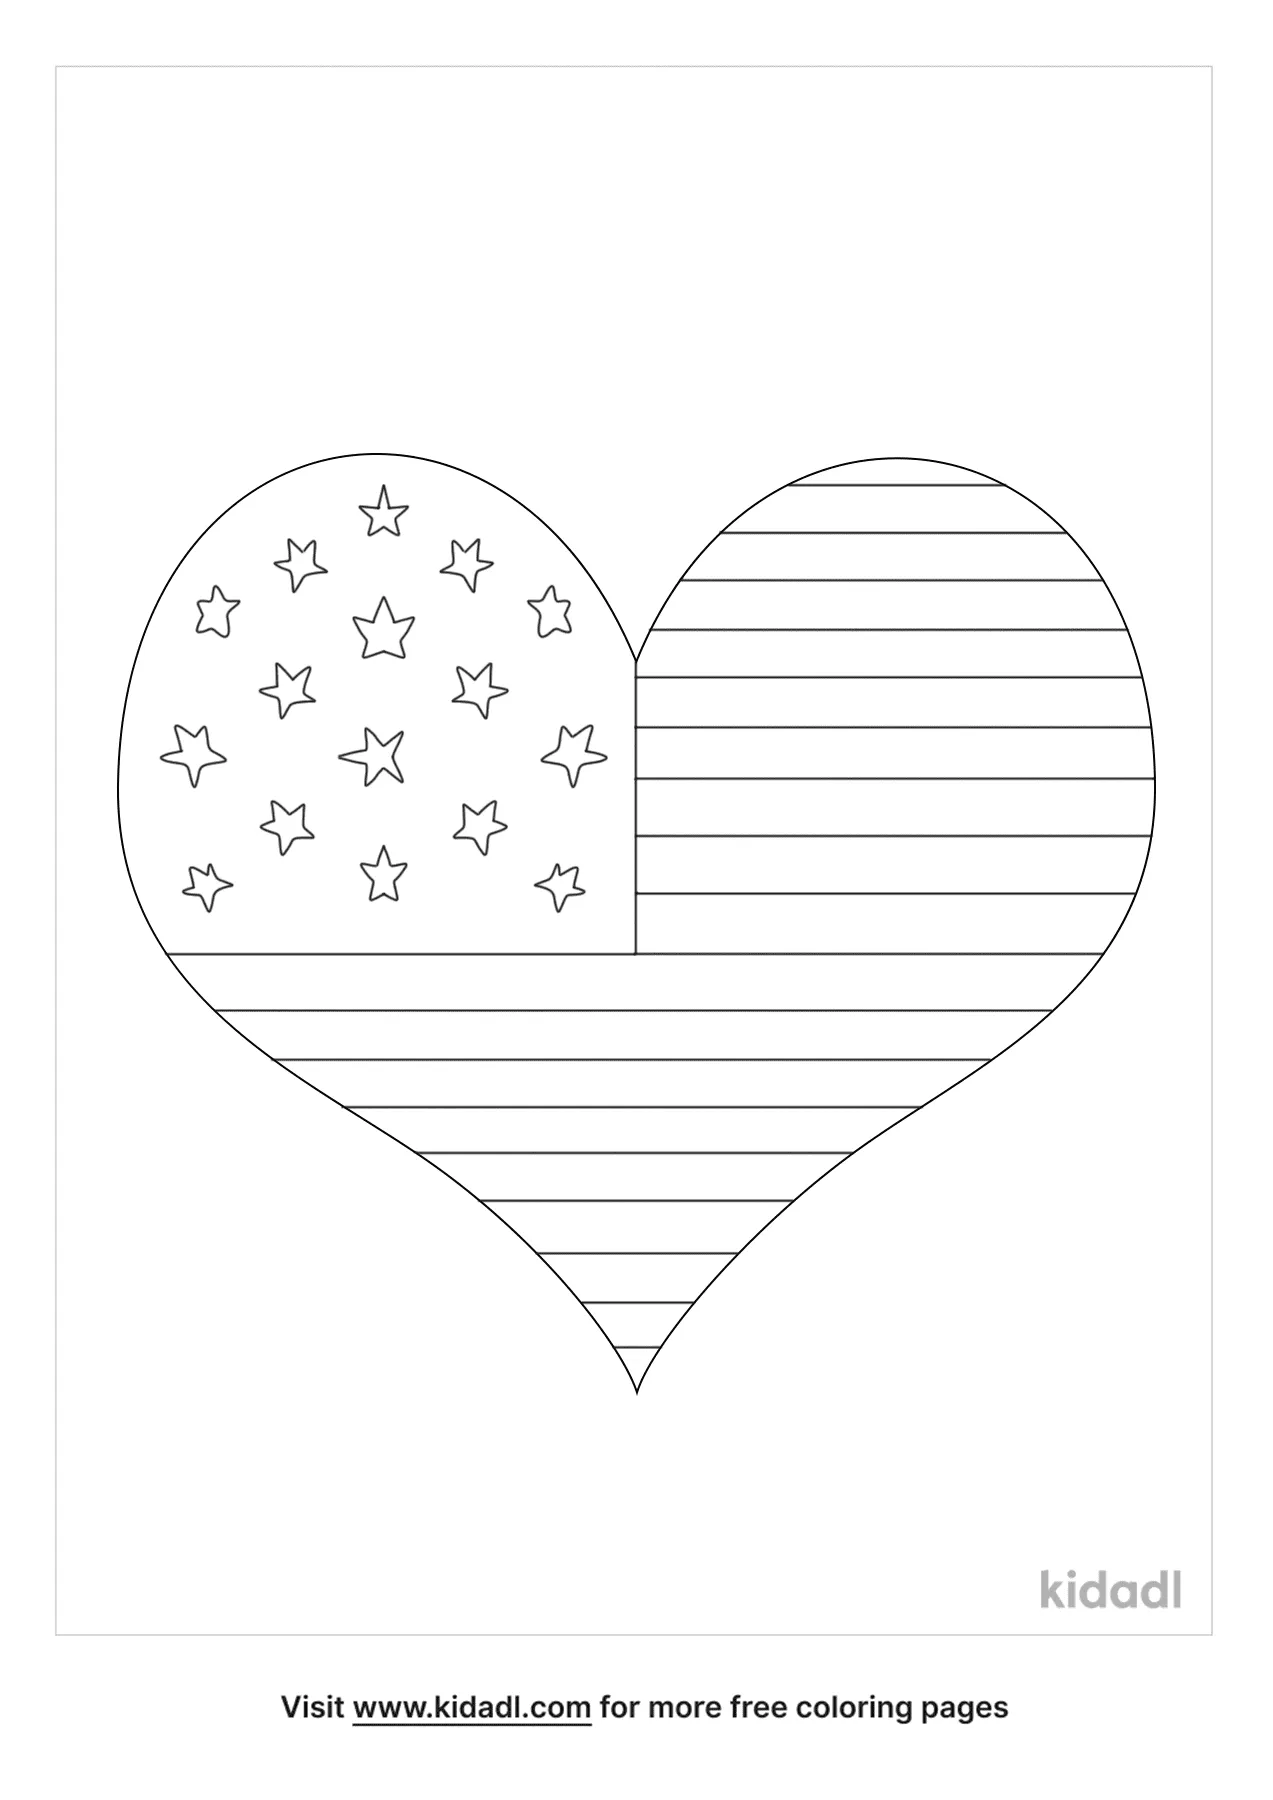 Flag And Heart Coloring Page | Free Flags Coloring Page | Kidadl